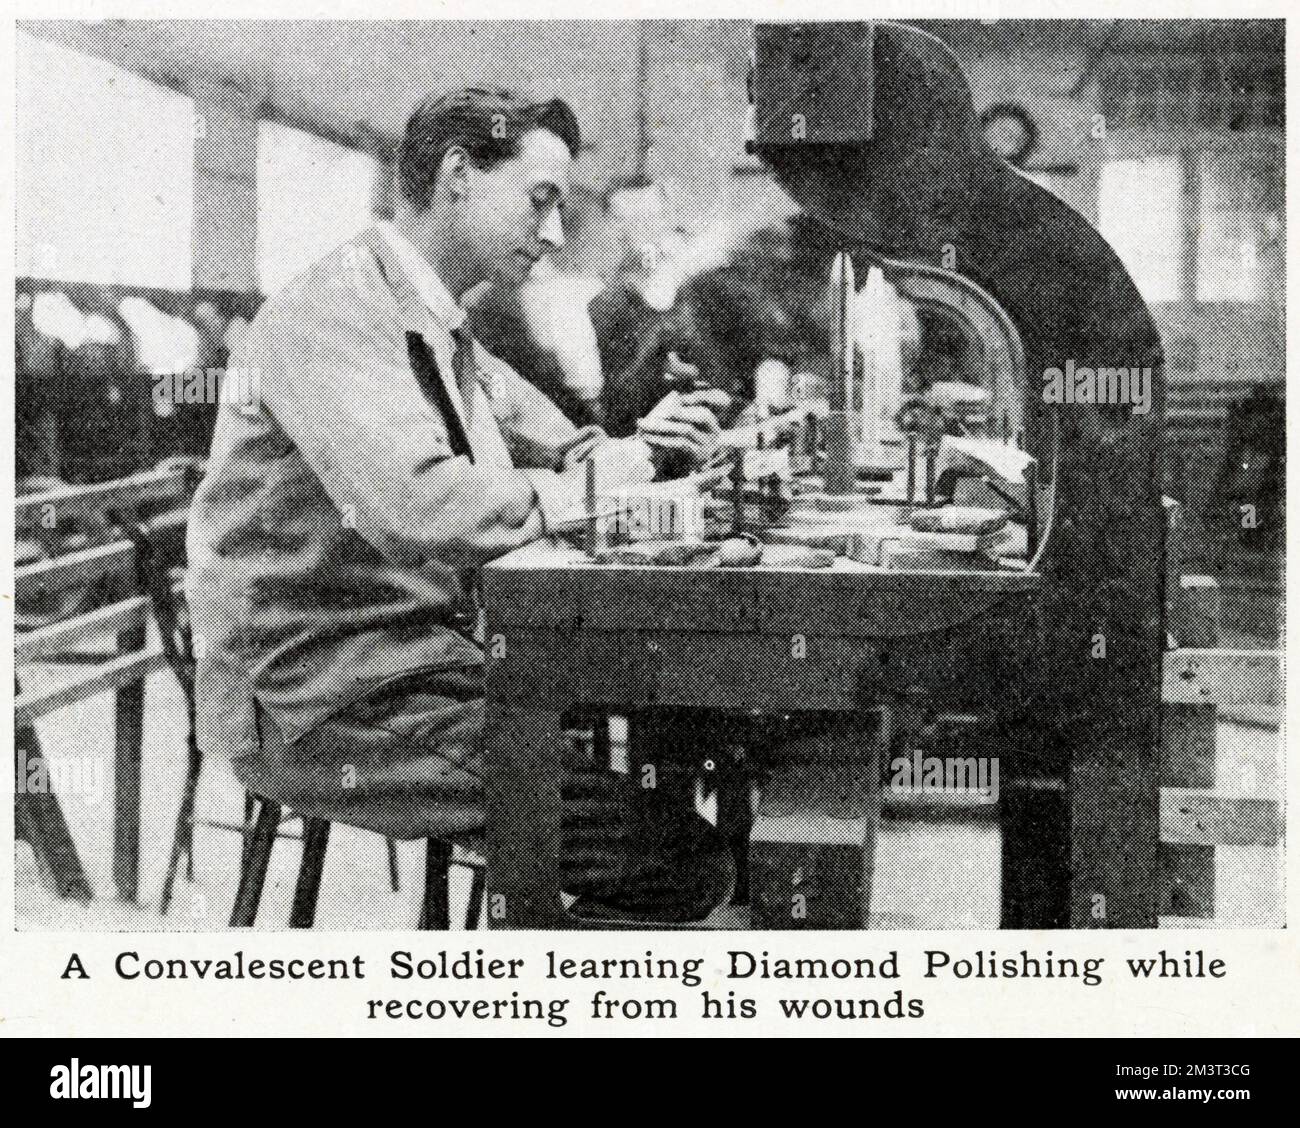 Learning diamond-polishing while recovering from wounds, a convalescent soldier at work. A pilot scheme was started in spring 1917 by Mr. Bernard Oppenheimer, a diamond merchant. The factory provided training for thousands of wounded ex-soldiers and sailors during and after World War One. Stock Photo